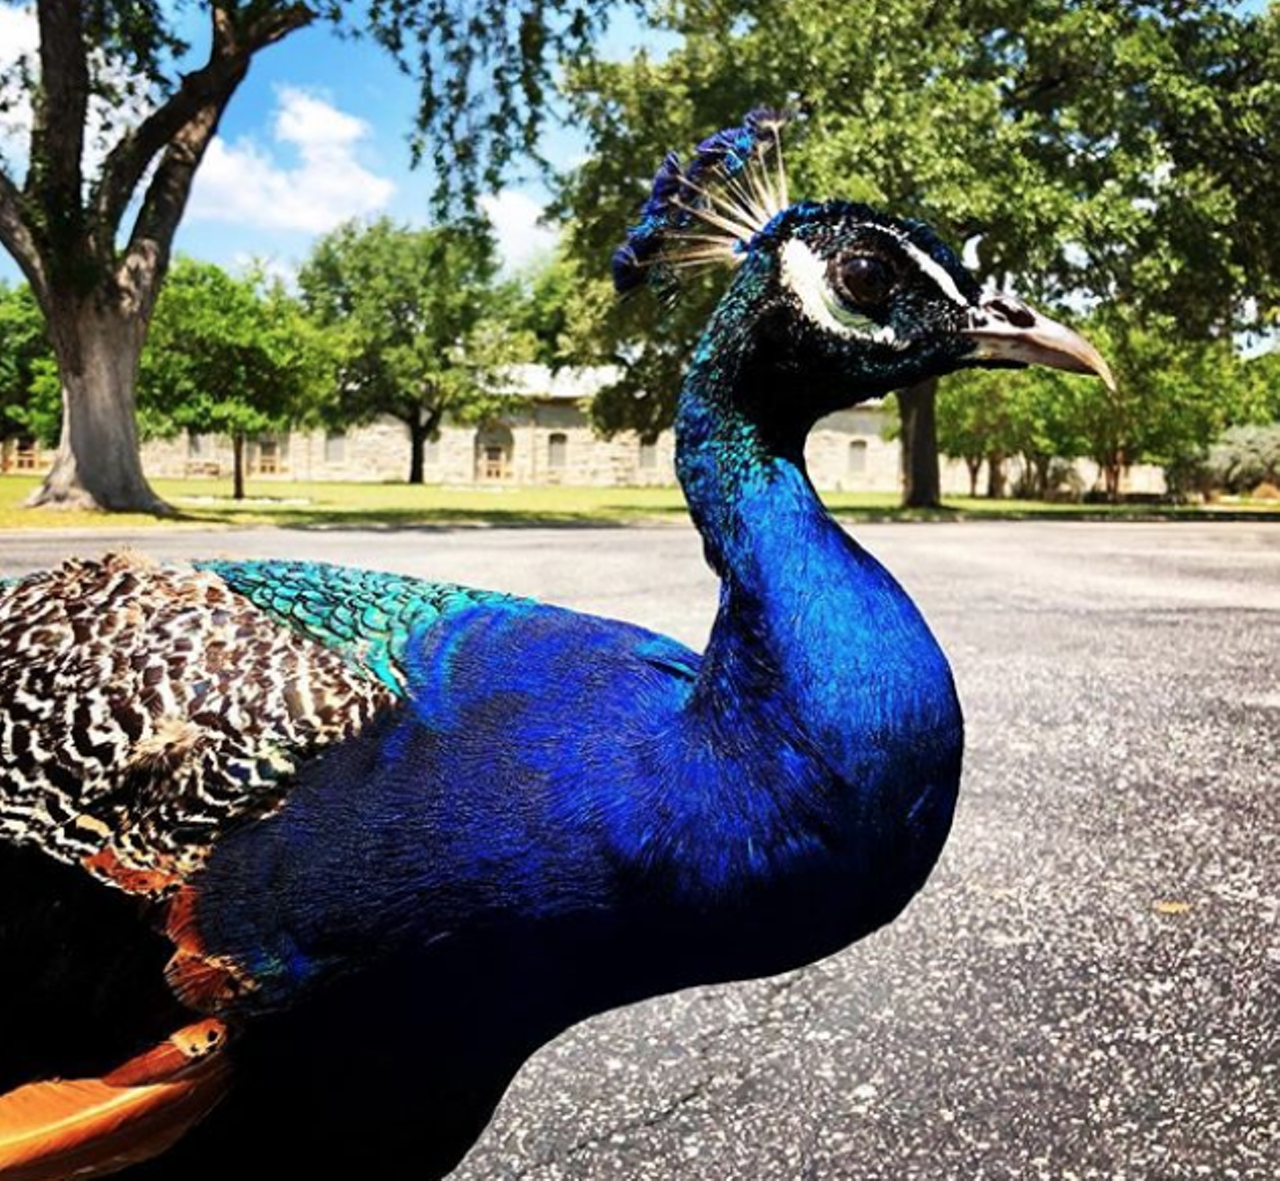 Get up close and personal with the wildlife at the Quadrangle at Fort Sam Houston
1405 E Grayson St, Fort Sam Houston, (210) 221-1886, jbsa.mil
Okay, so “up close and personal” may be a bit of an exaggeration in most scenarios, but you can and should definitely check out the Quadrangle at Fort Sam Houston, which is also known as “The Quad” to those in-the-know. You can watch cute deer grazing, exotic peacocks spreading their tails, ducks waddling about, peculiar turkeys pecking at the ground, and, worst of all, geese. You know what would definitely NOT be romantic? Letting bae get attacked by geese.
Photo via Instagram / eturner22